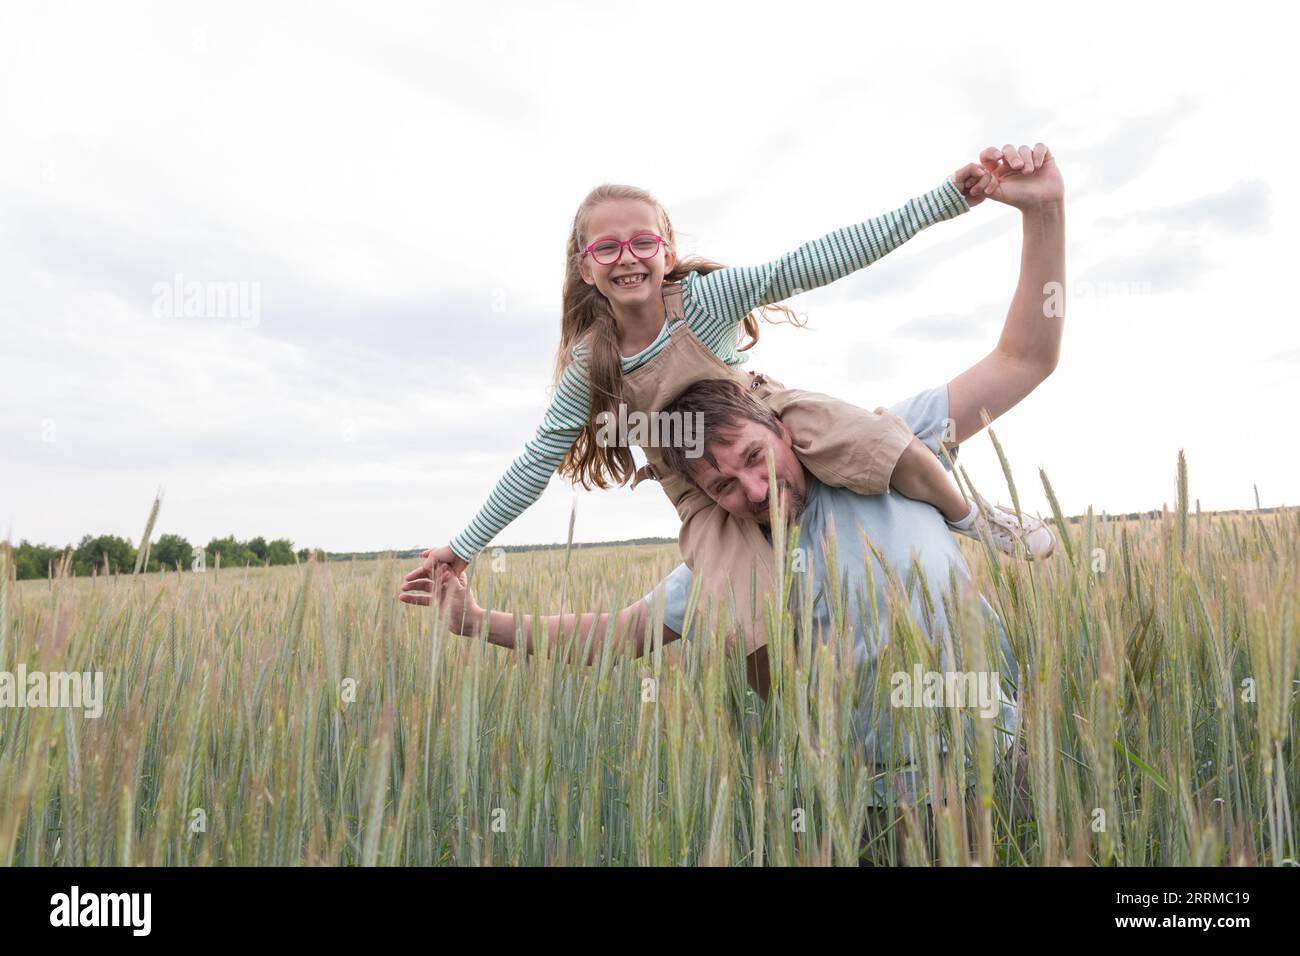 A girl and her dad are happy and playing against the backdrop of an agricultural field. Stock Photo